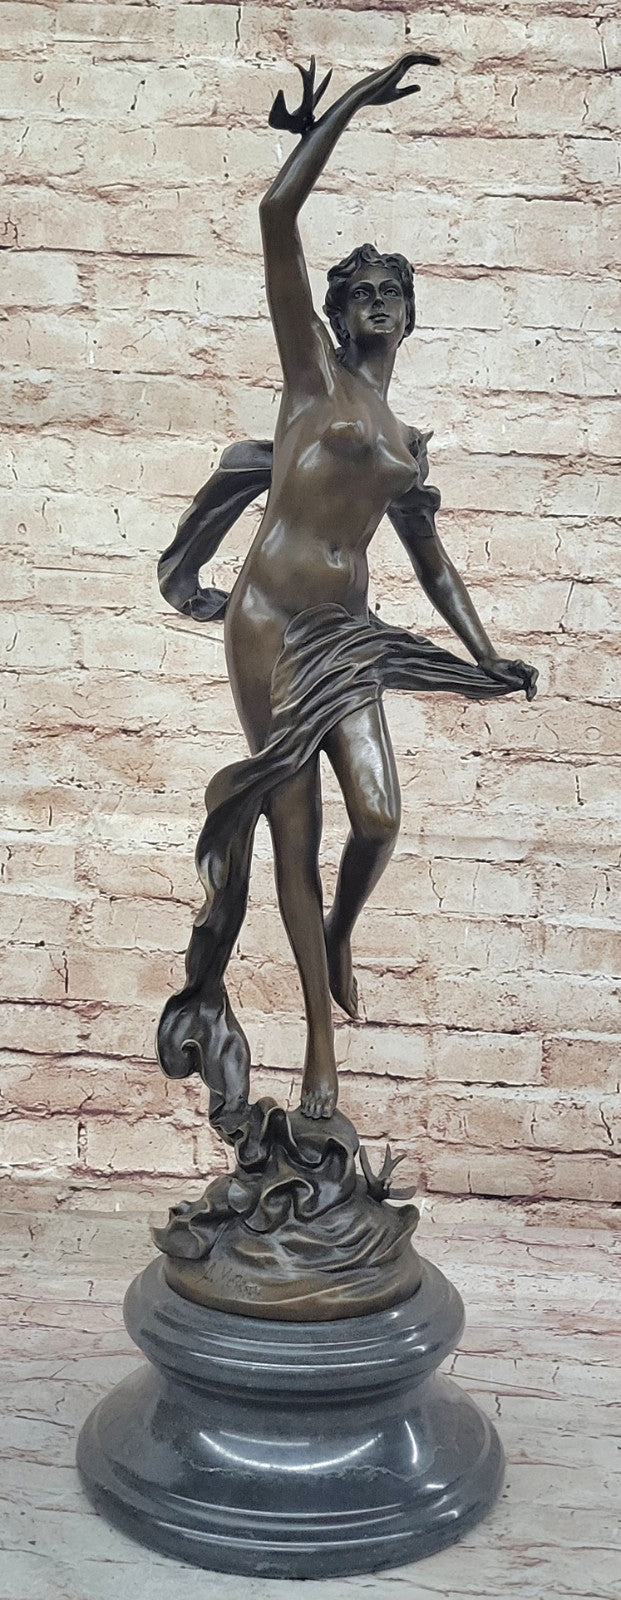 Handcrafted Excellence: A. Moreau Sculpture - Bronze Nude Lady with Bird, Art Deco